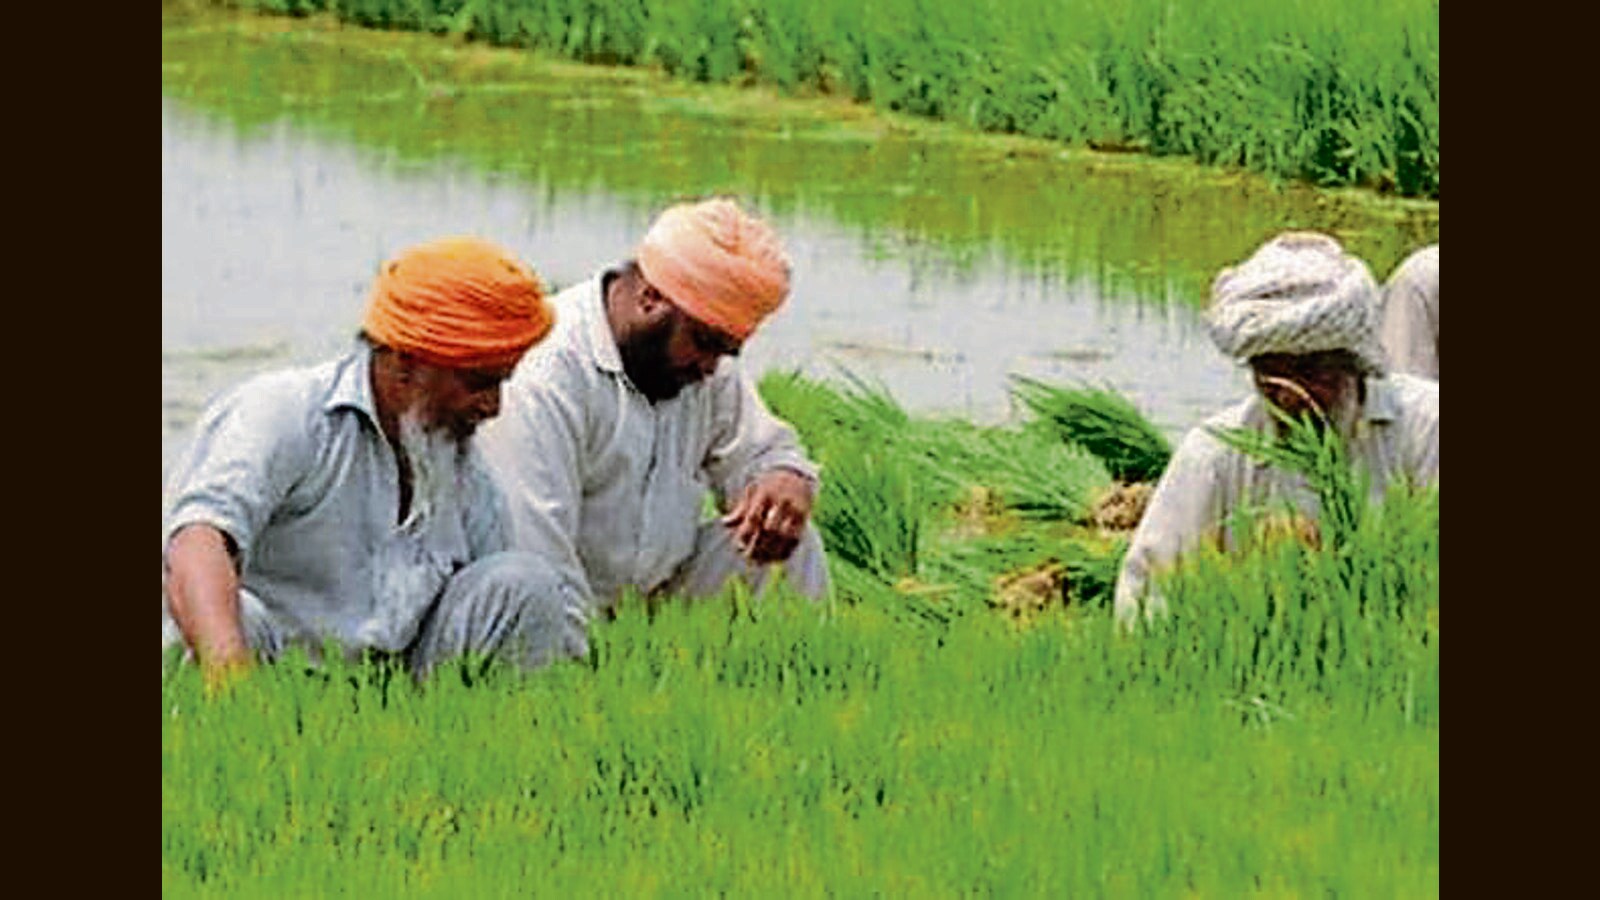 PR 126 paddy variety can save up to 7 bl cubic metres water in Punjab: PAU research - Hindustan Times